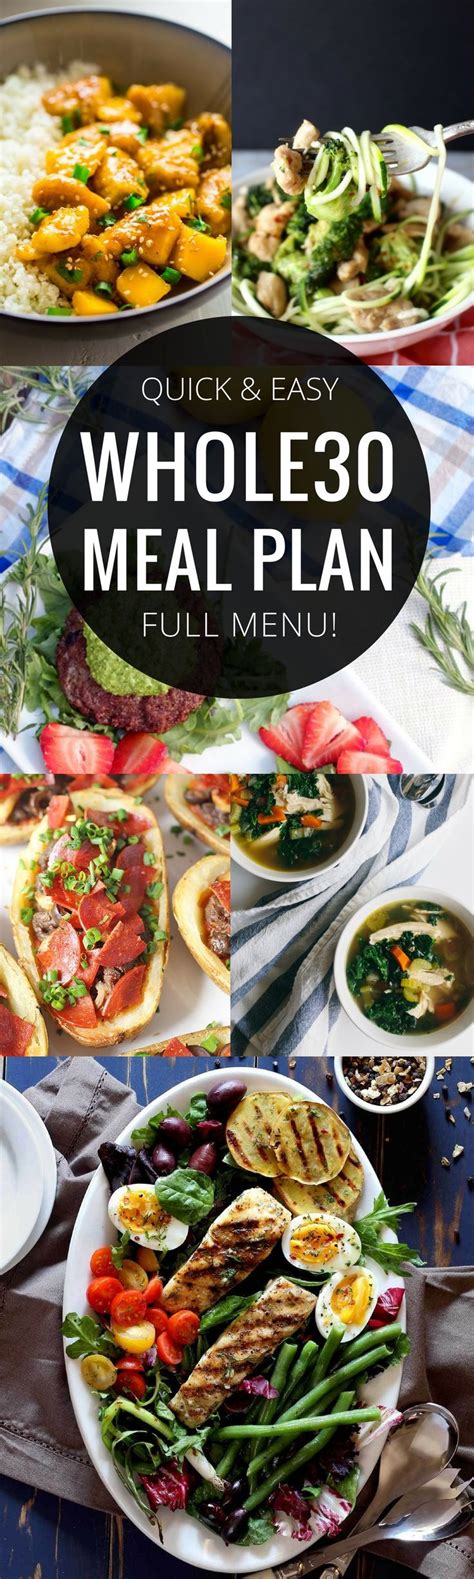 Whole30 Meal Plan Easy Whole 30 Recipes Whole 30 Meal Plan Whole 30